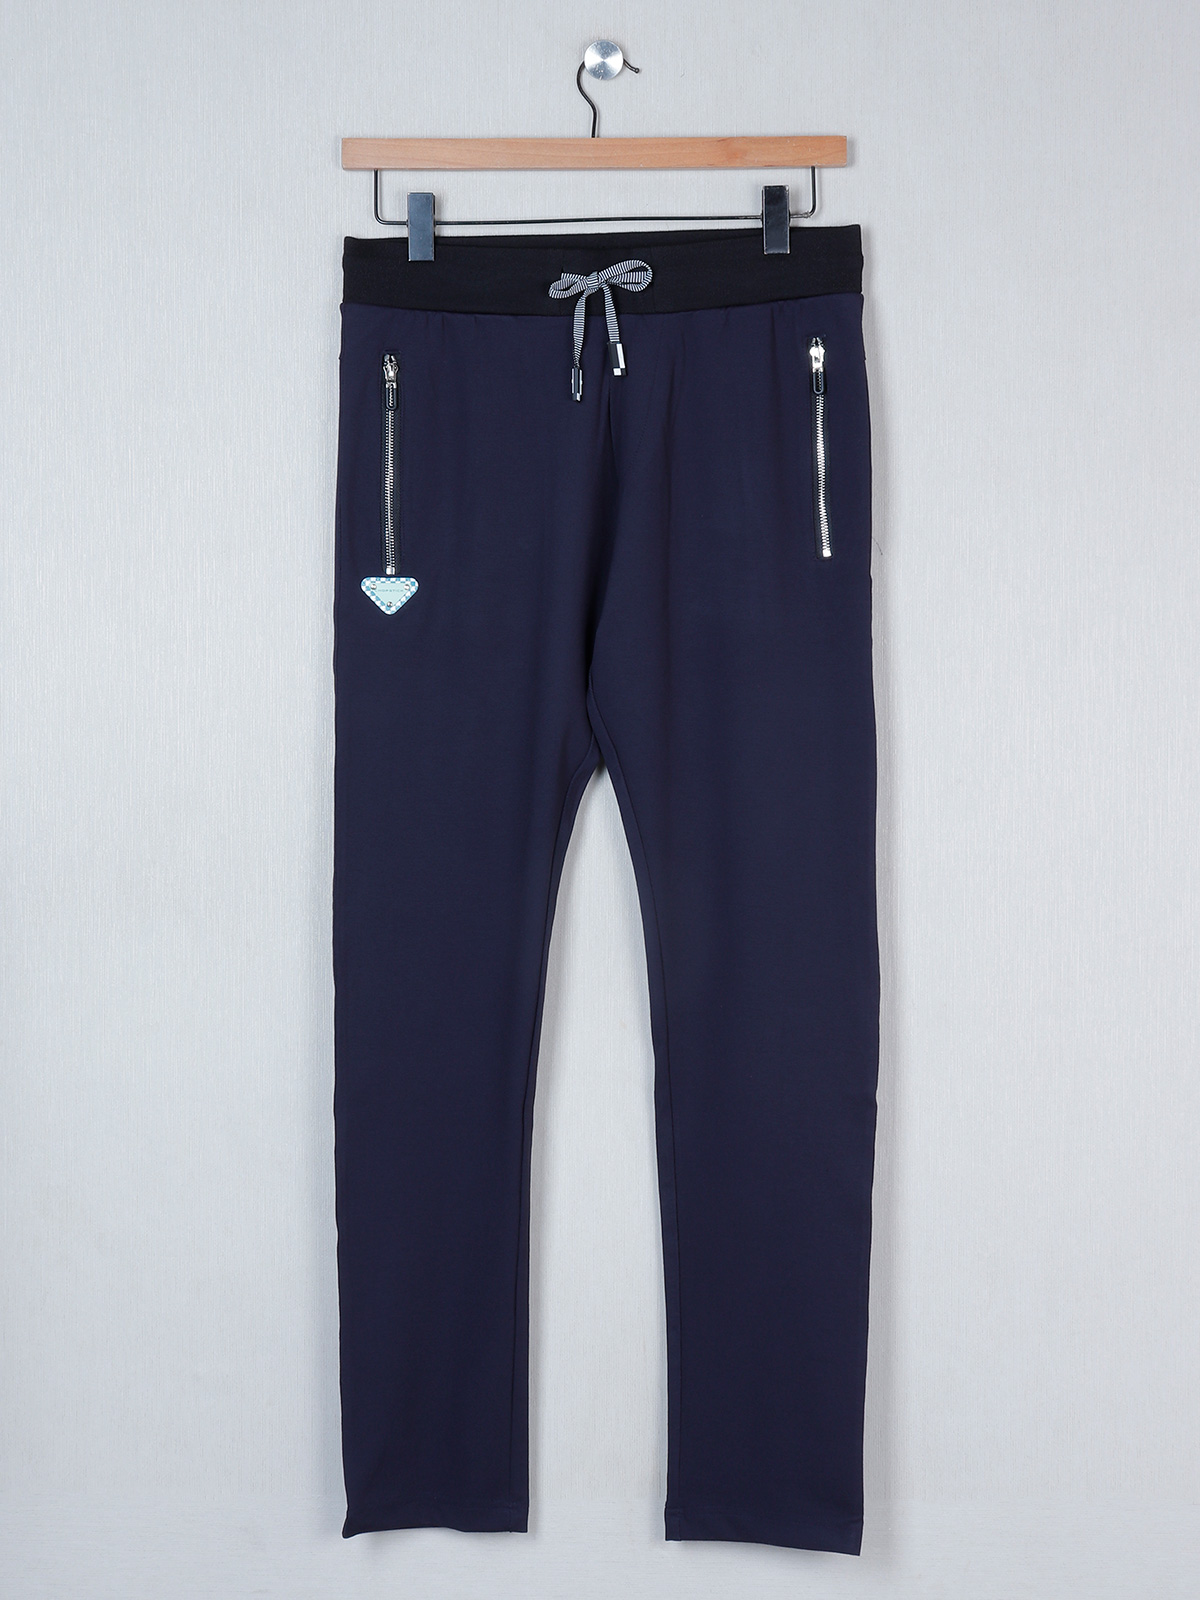 Made to Order Boot Cut Pants - Culinary Classics